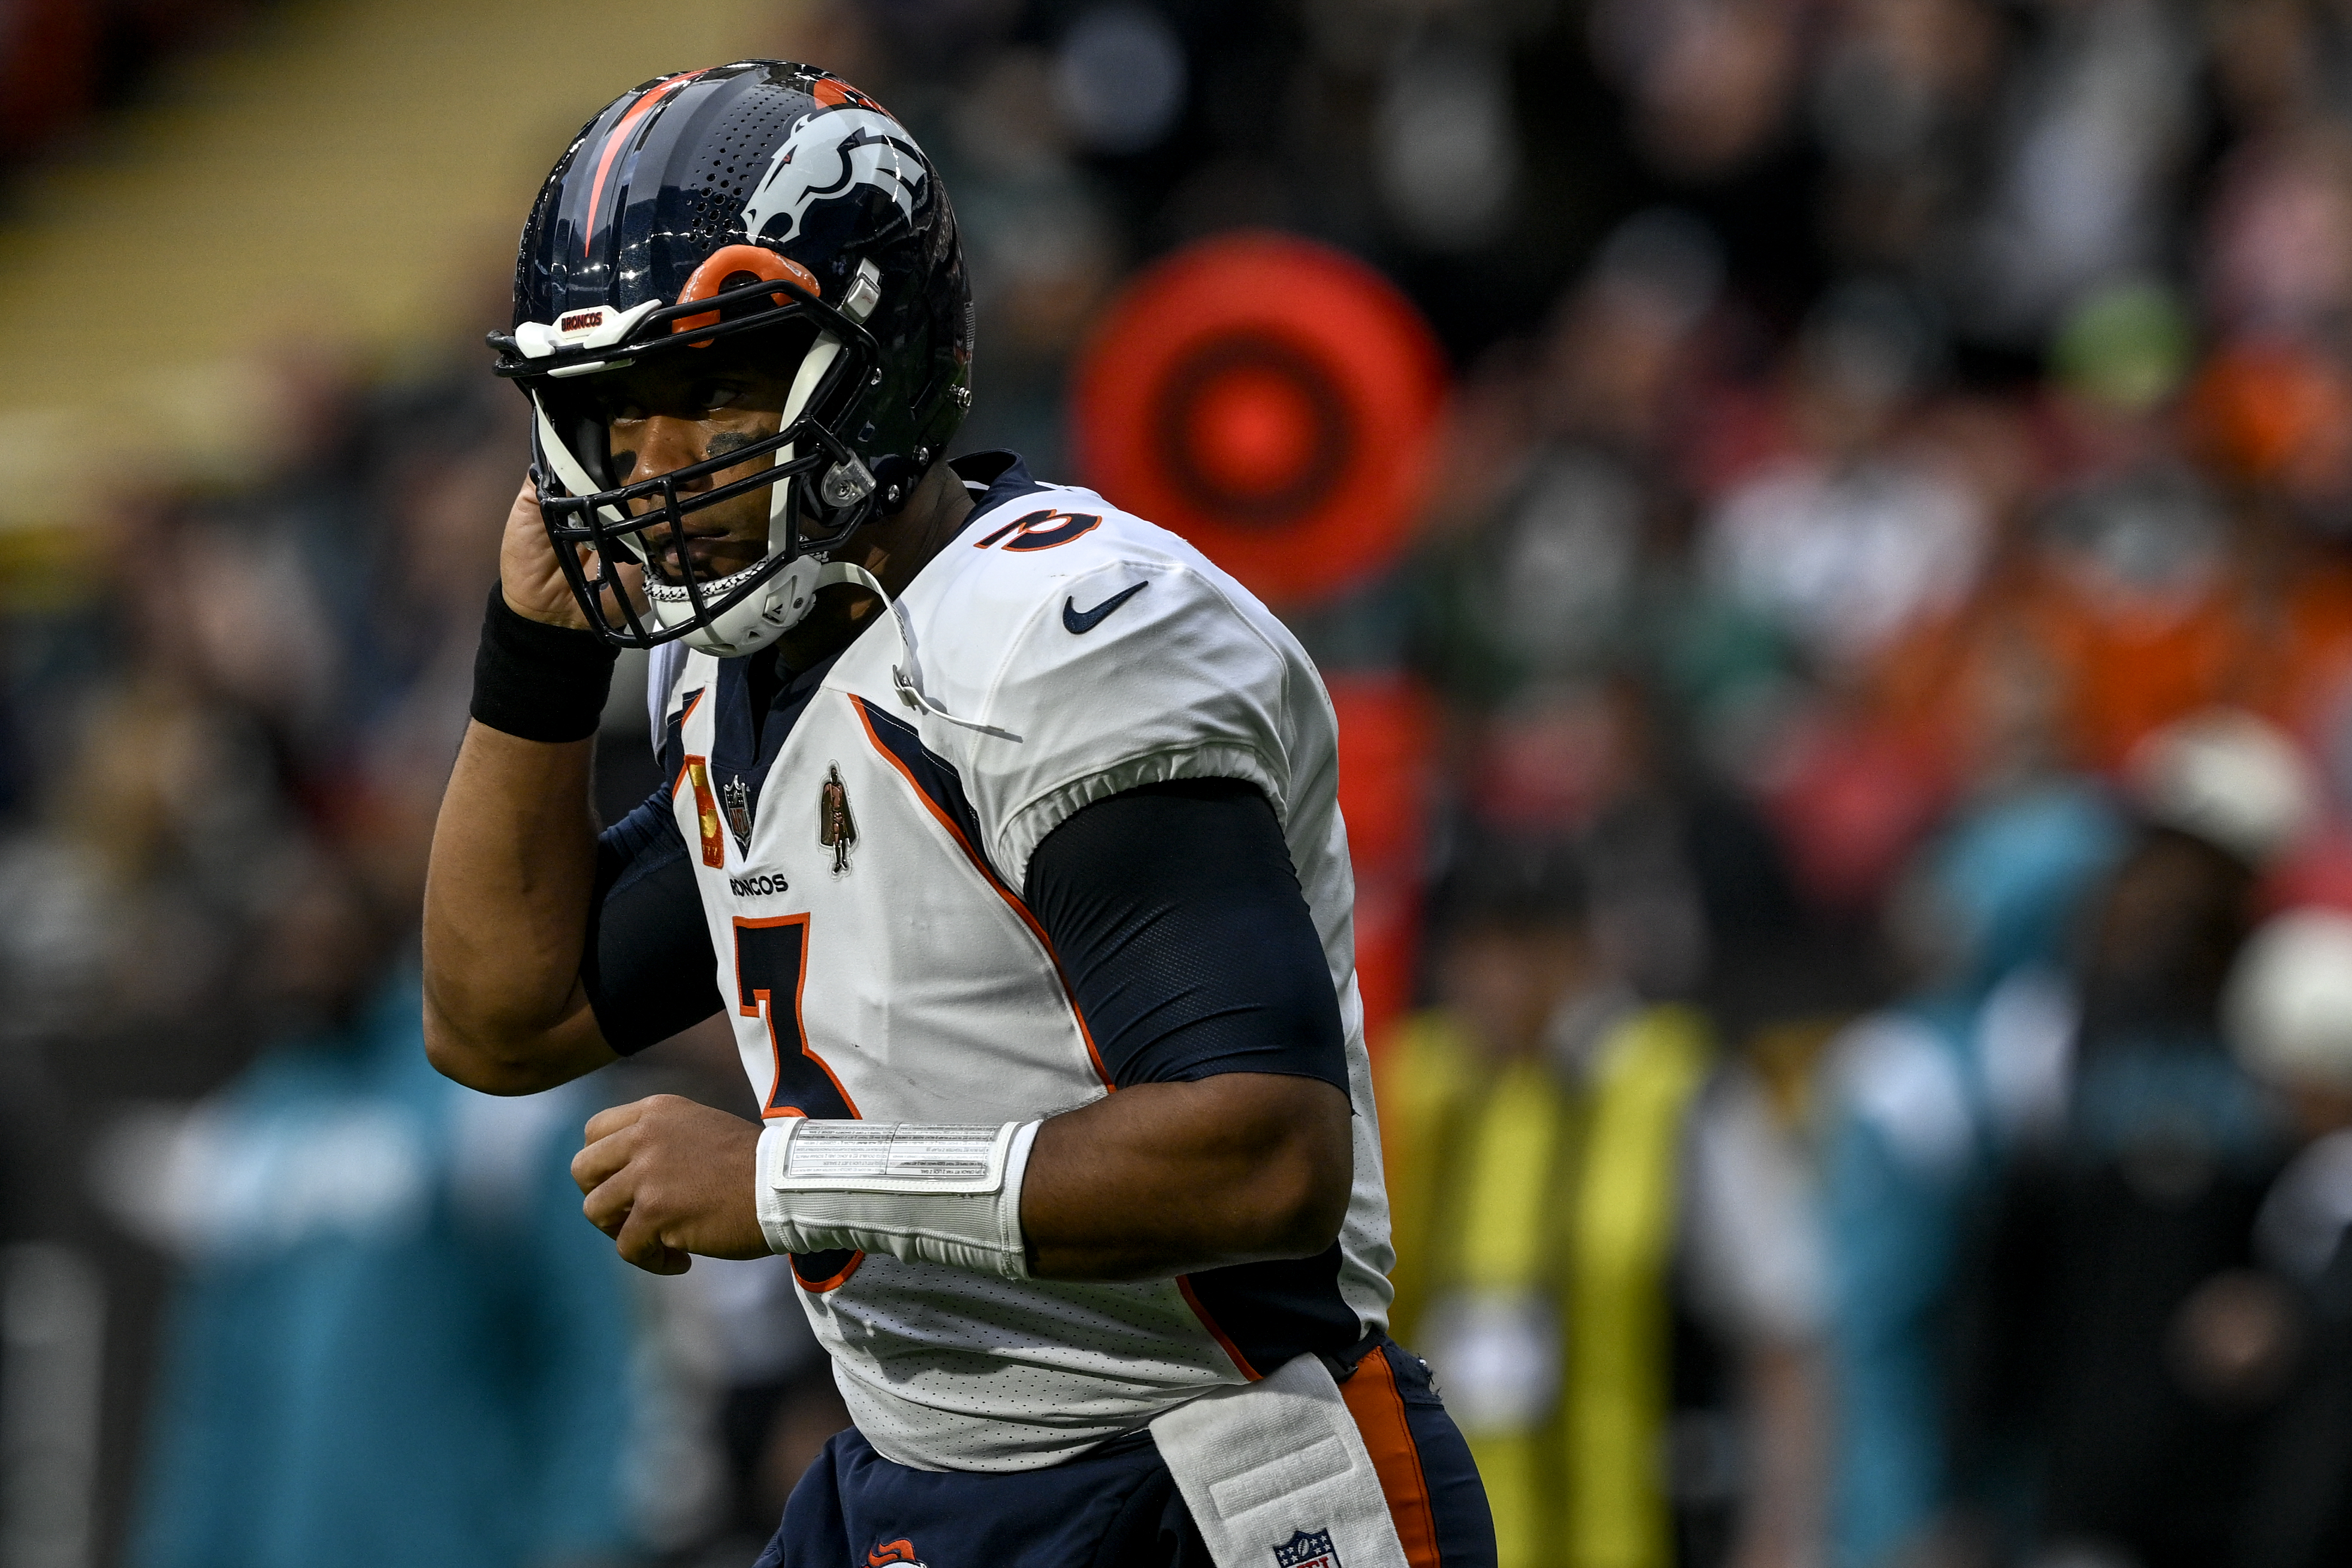 Quarterback Russell Wilson of the Denver Broncos looks on in the game against the Jacksonville Jaguars at Wembley Stadium in London, Britain, October 30, 2022. /CFP